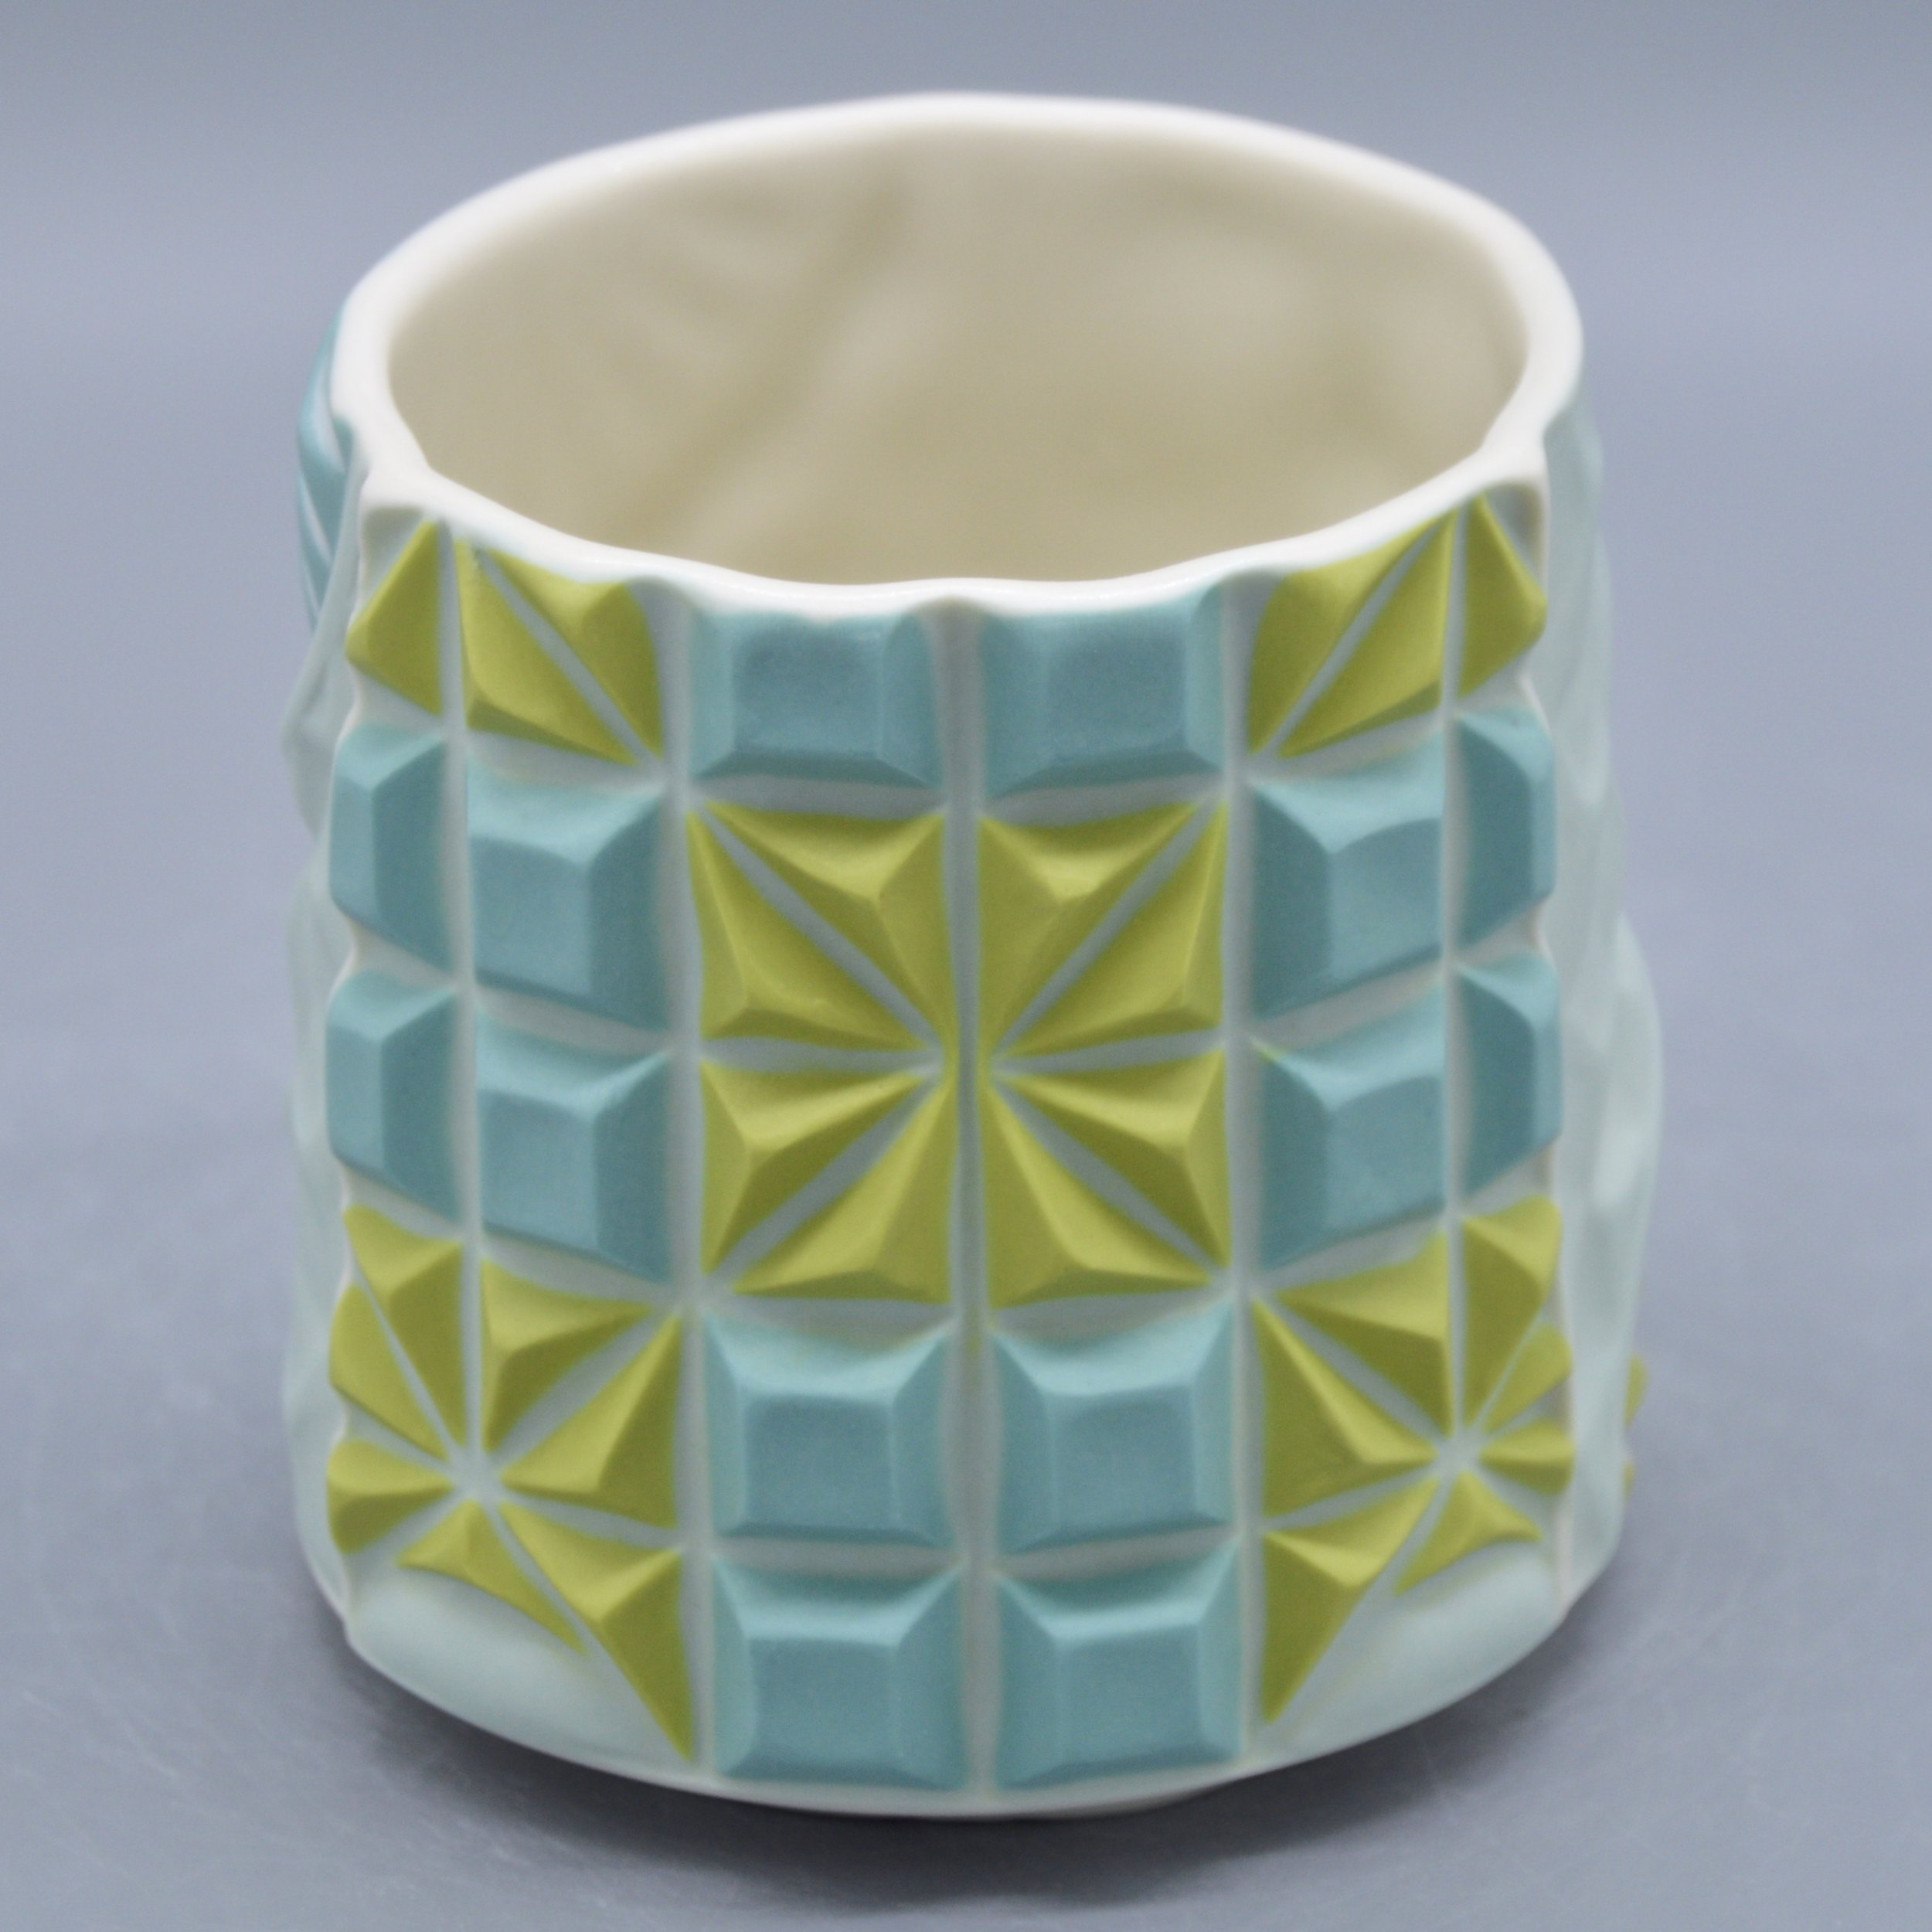 Blocks in Chartreuse, Turquoise, Light Turquoise